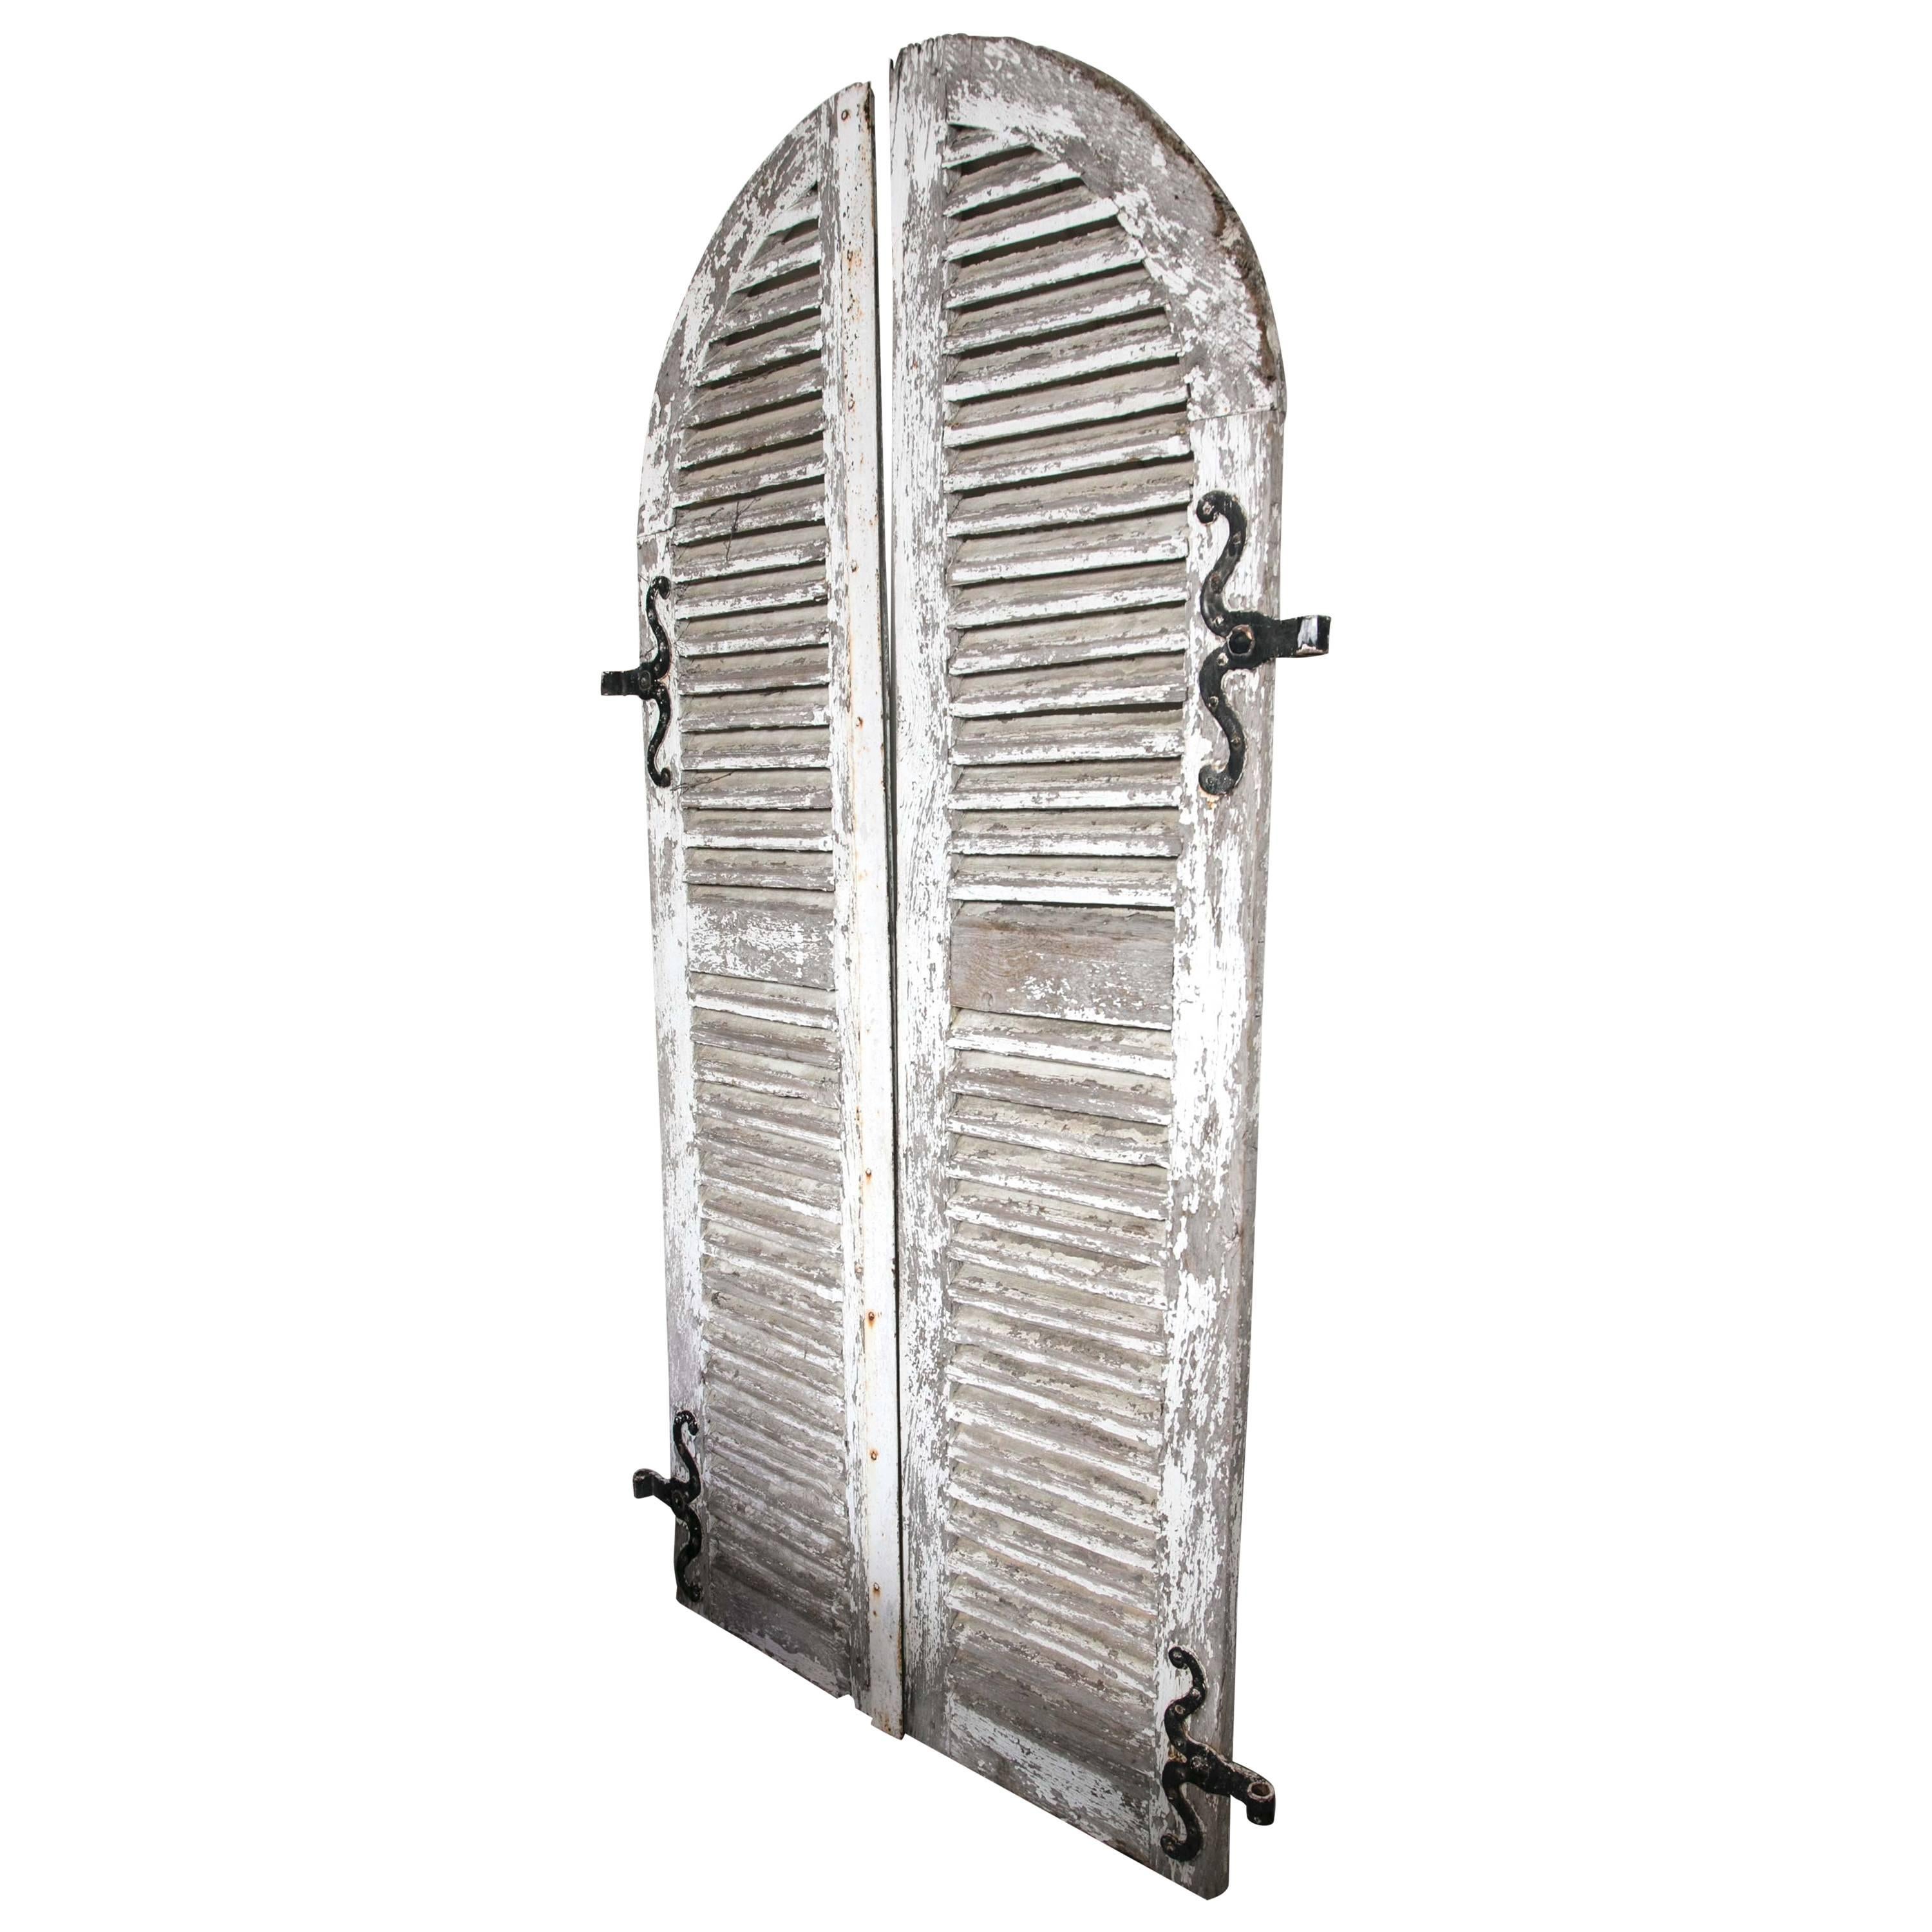 Arched English Door Shutters For Sale